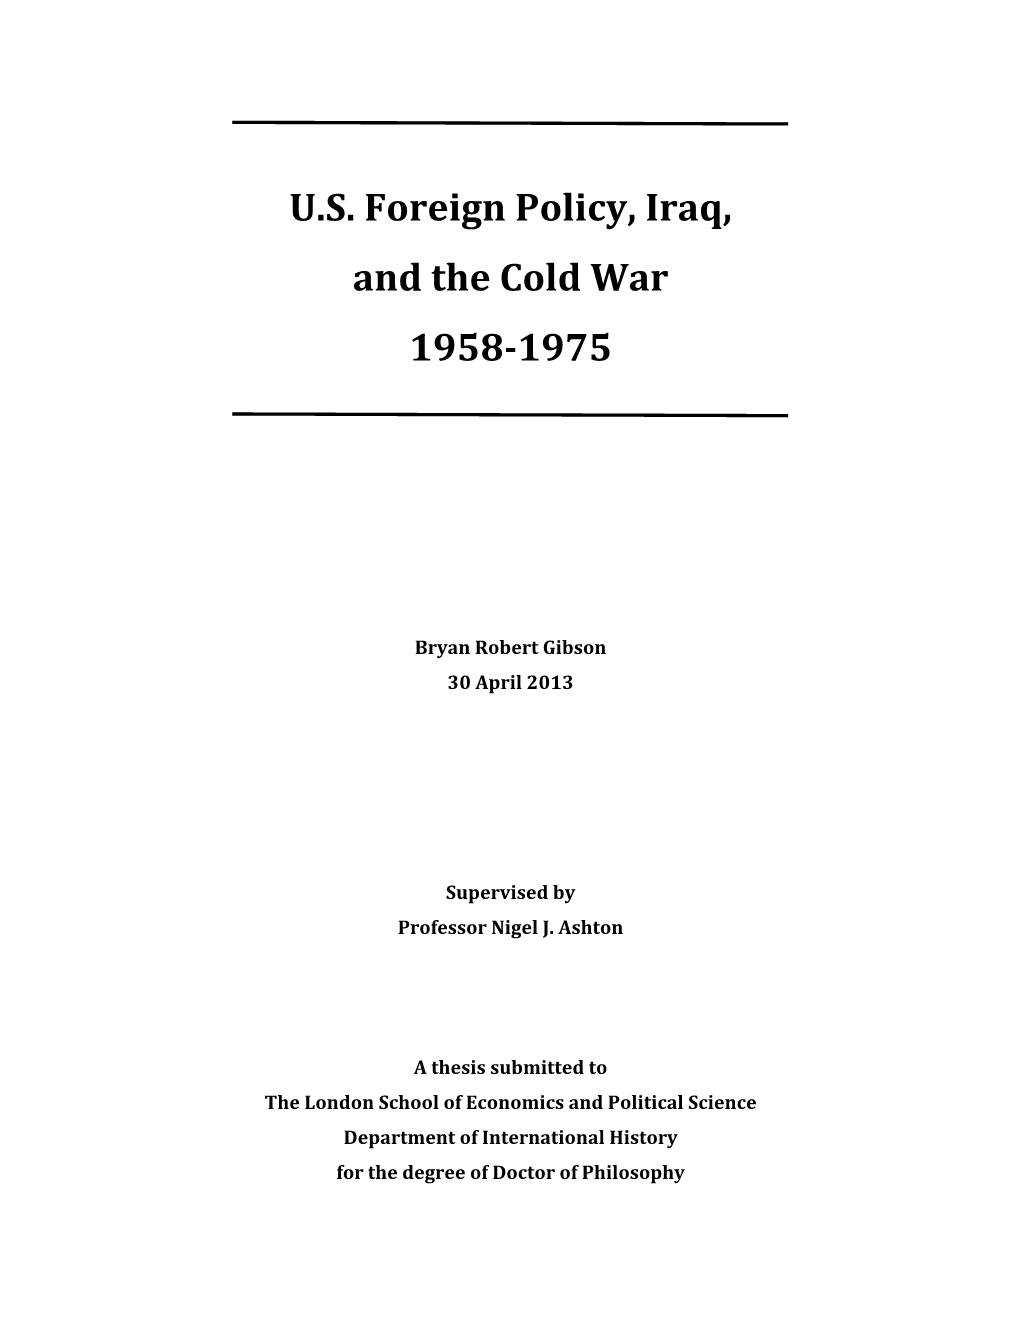 U.S. Foreign Policy, Iraq, and the Cold War 1958-1975